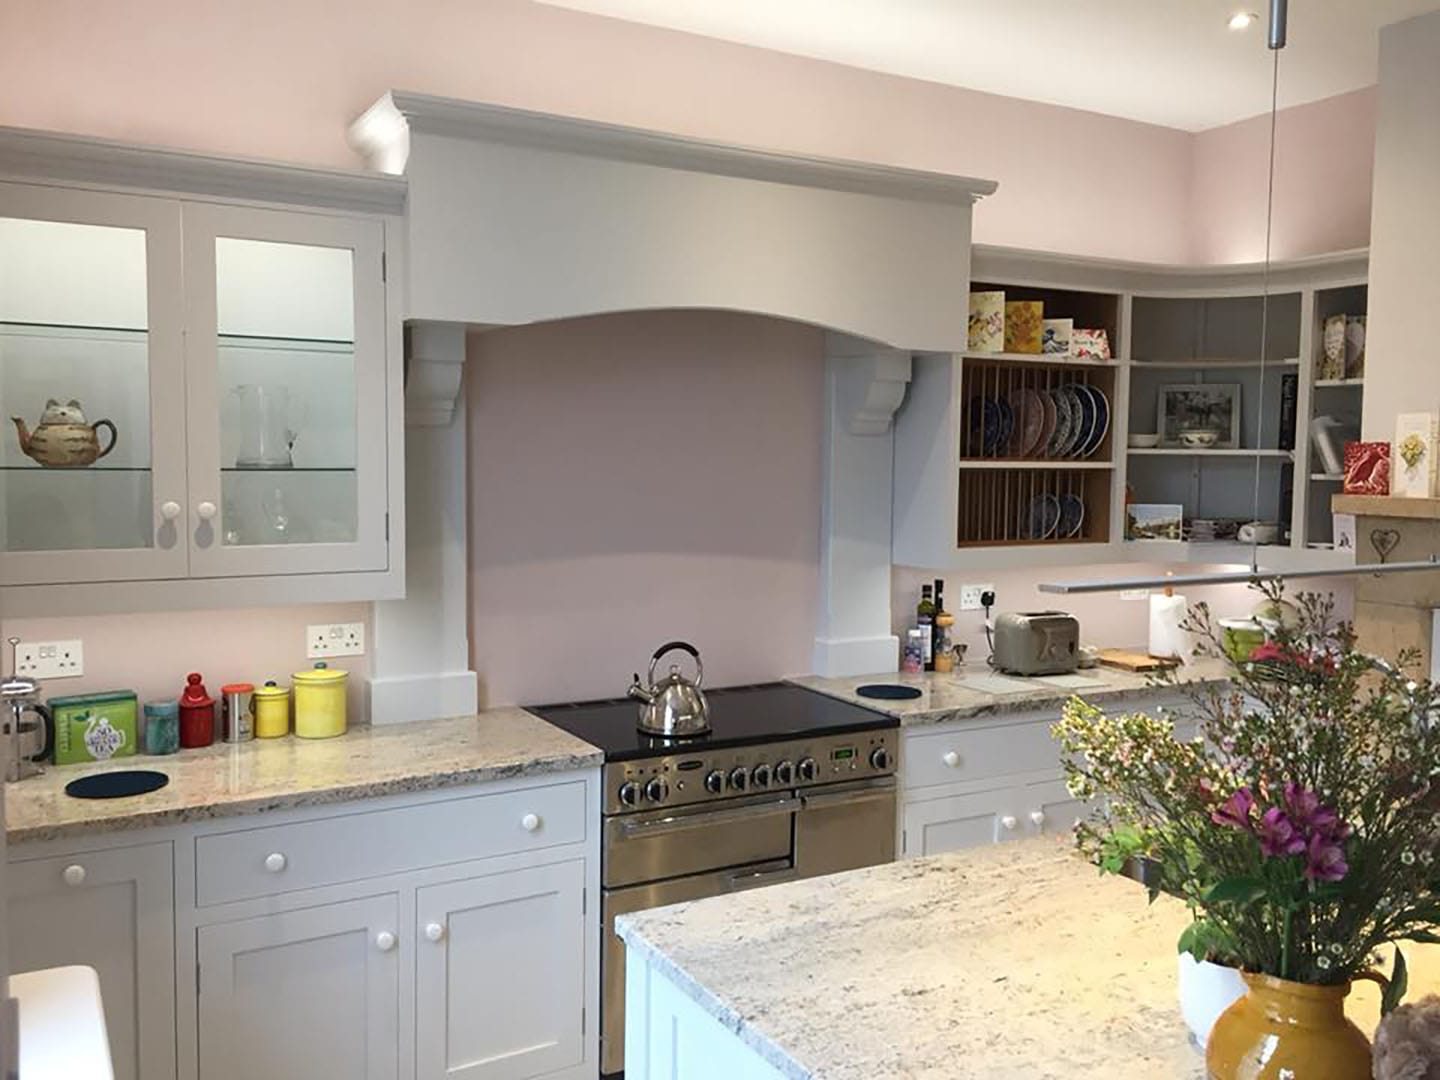 The cooker hood and stove of the bespoke kitchen